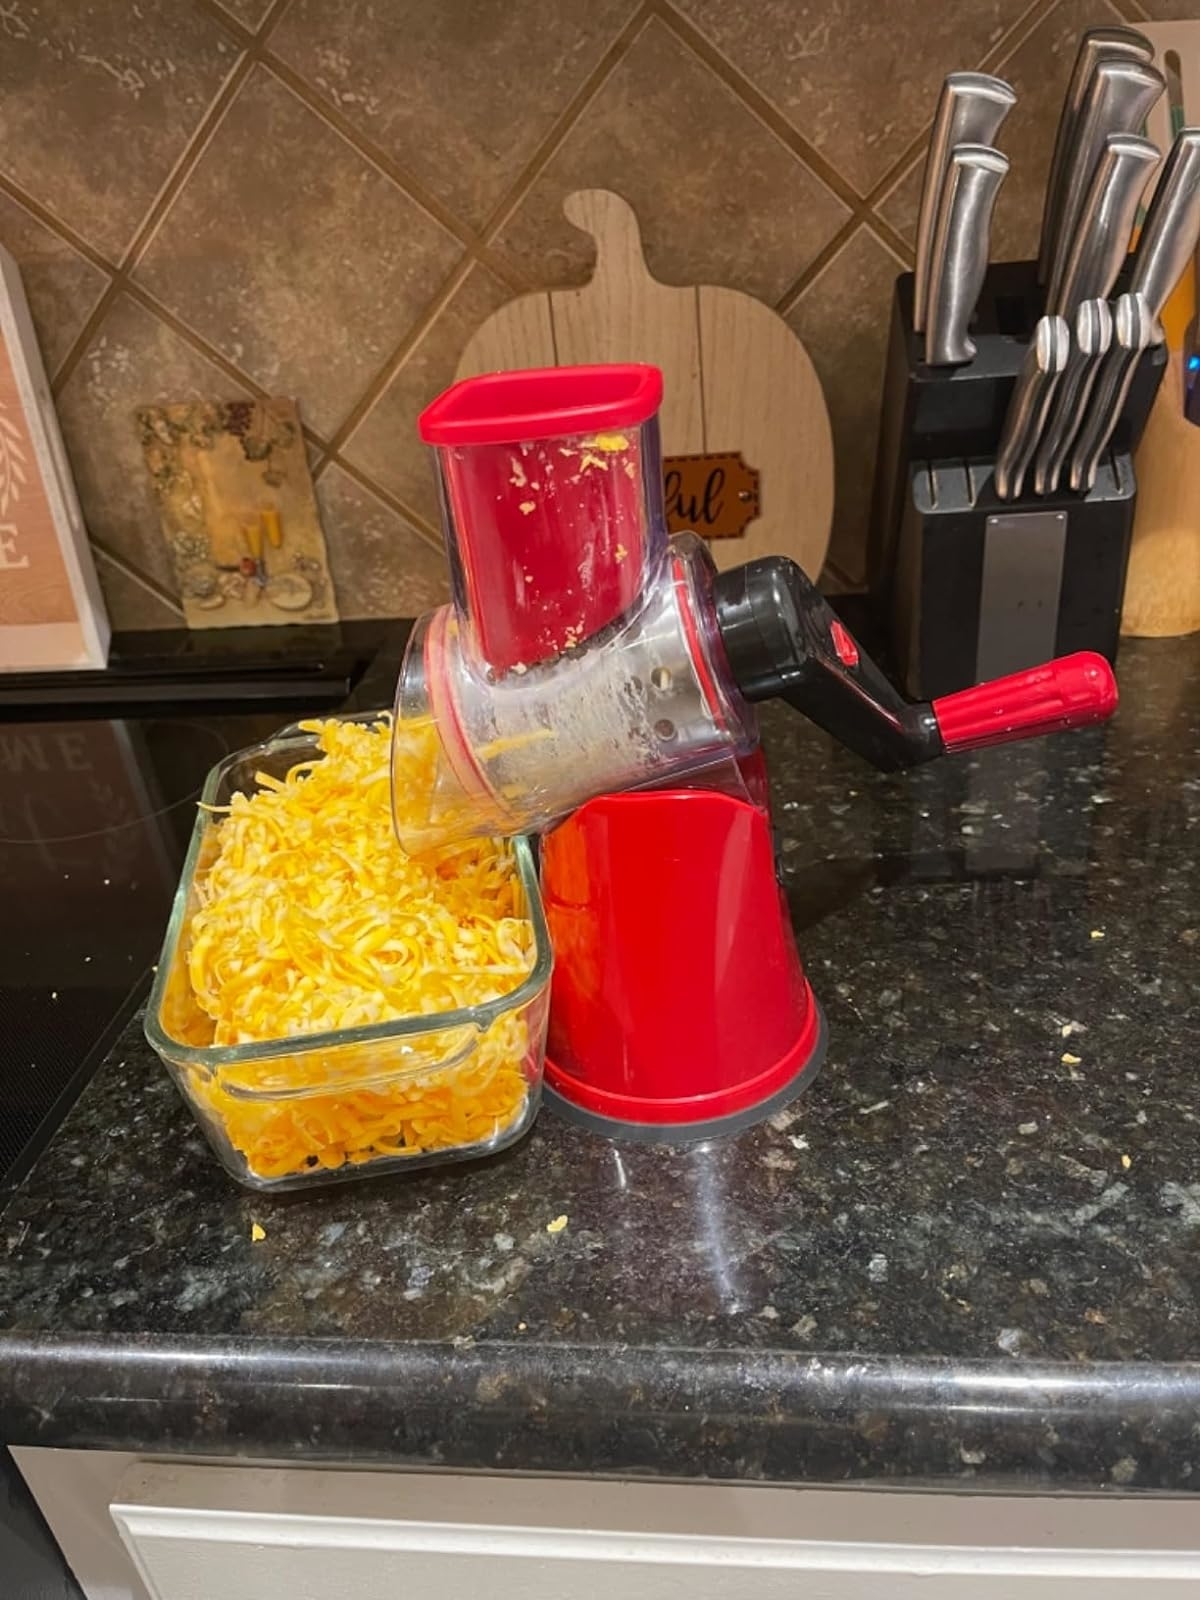 A countertop with a red cheese grater filled with shredded cheese next to a glass container